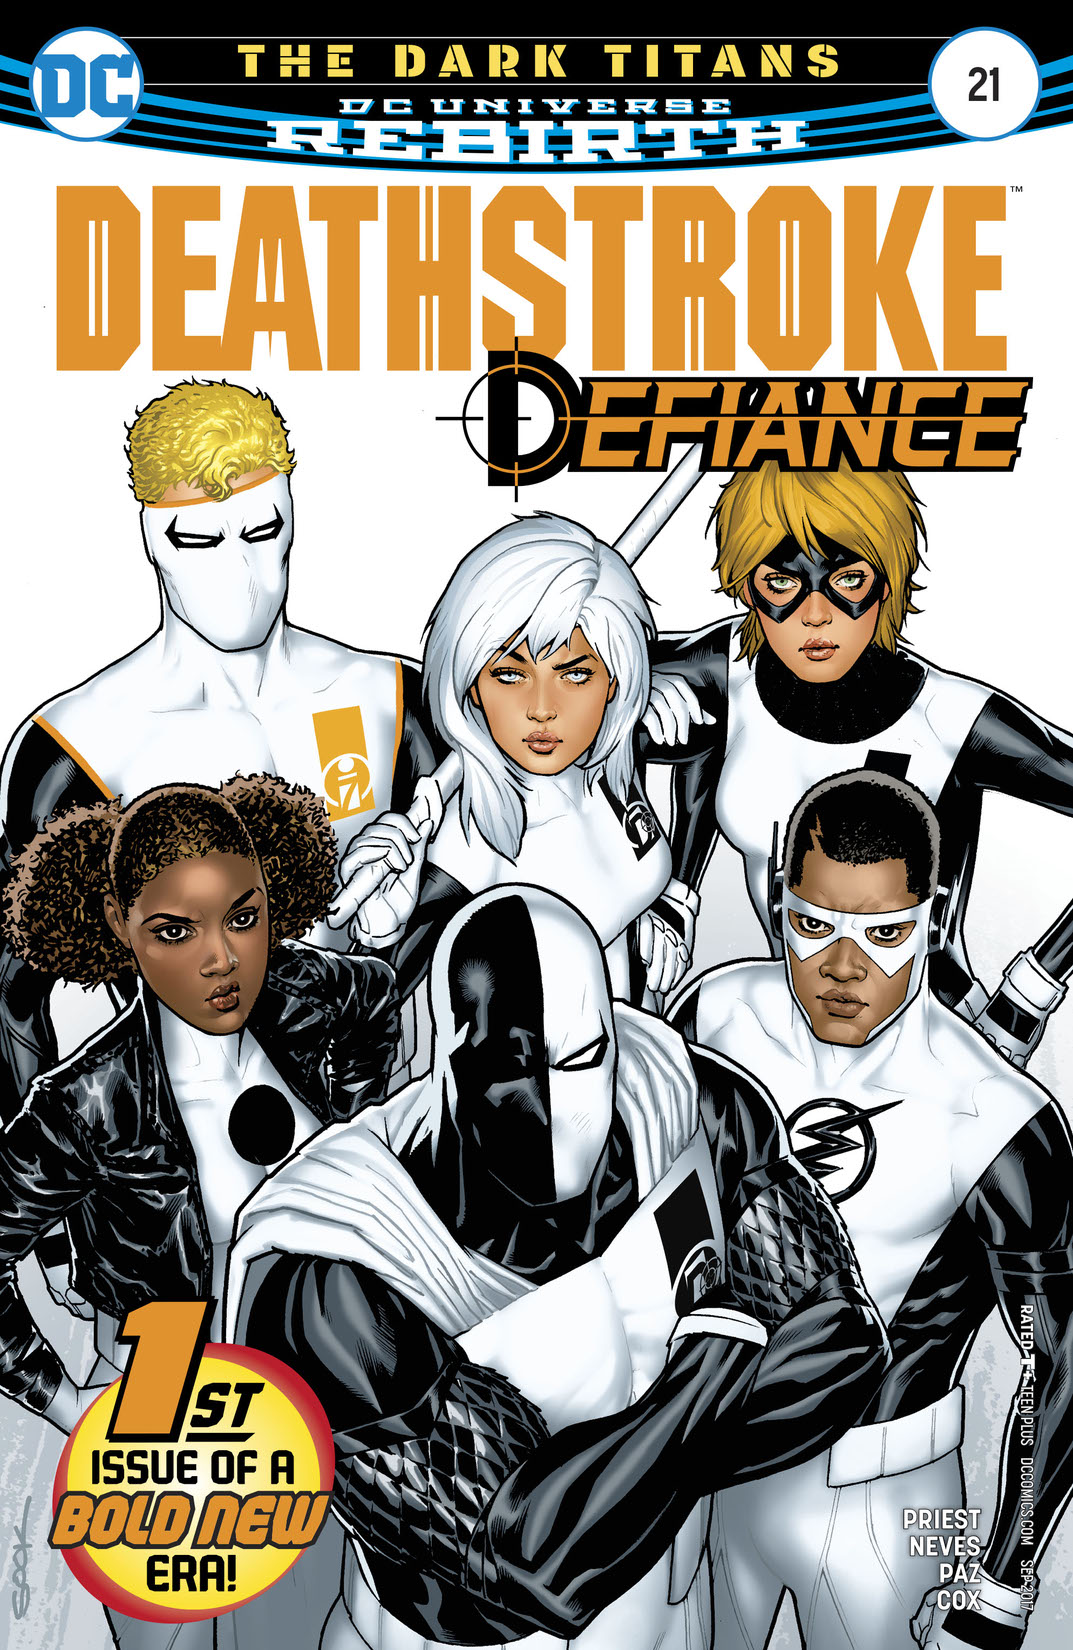 Deathstroke (2016-) #21 preview images